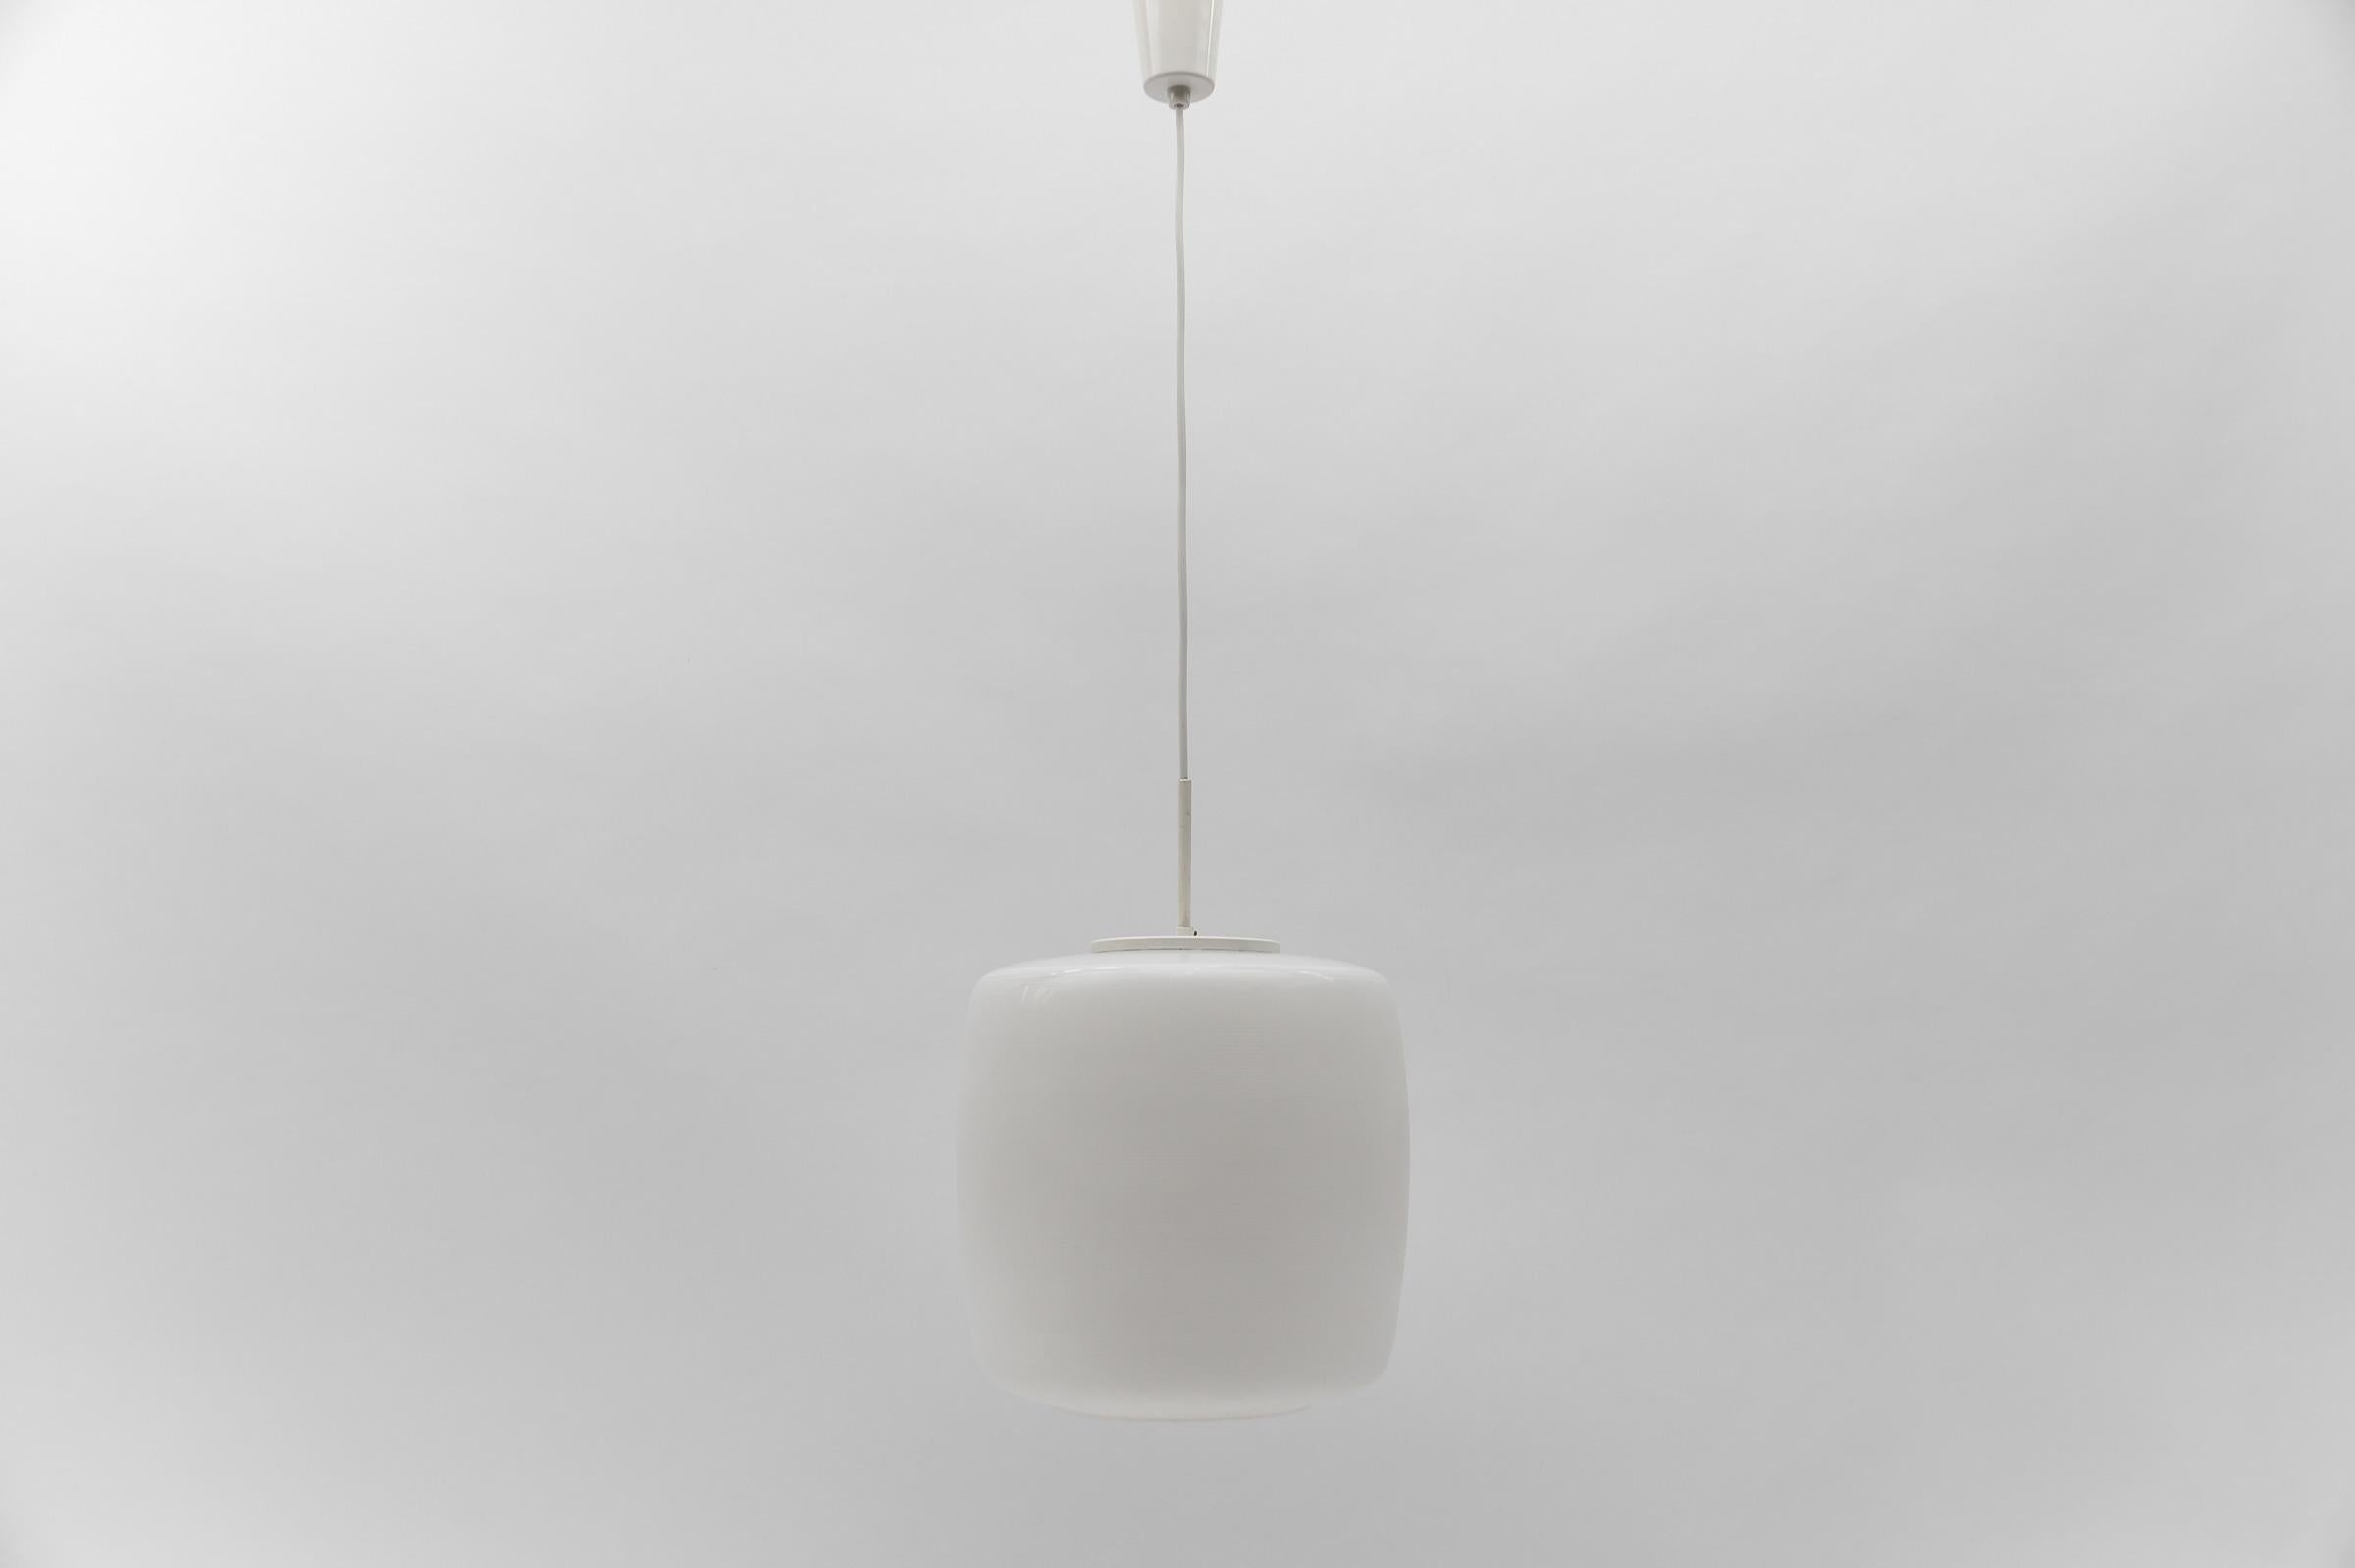 Design by Wilhelm Wagenfeld for Peill & Putzler, Du¨ren, Germany 1954.

1x E27 socket. 

Measures: Total height 110cm. Diameter 24cm. 

The Peill and Sohn Glassworks in Düren, destroyed in World War II, and the Putzler brothers' works in